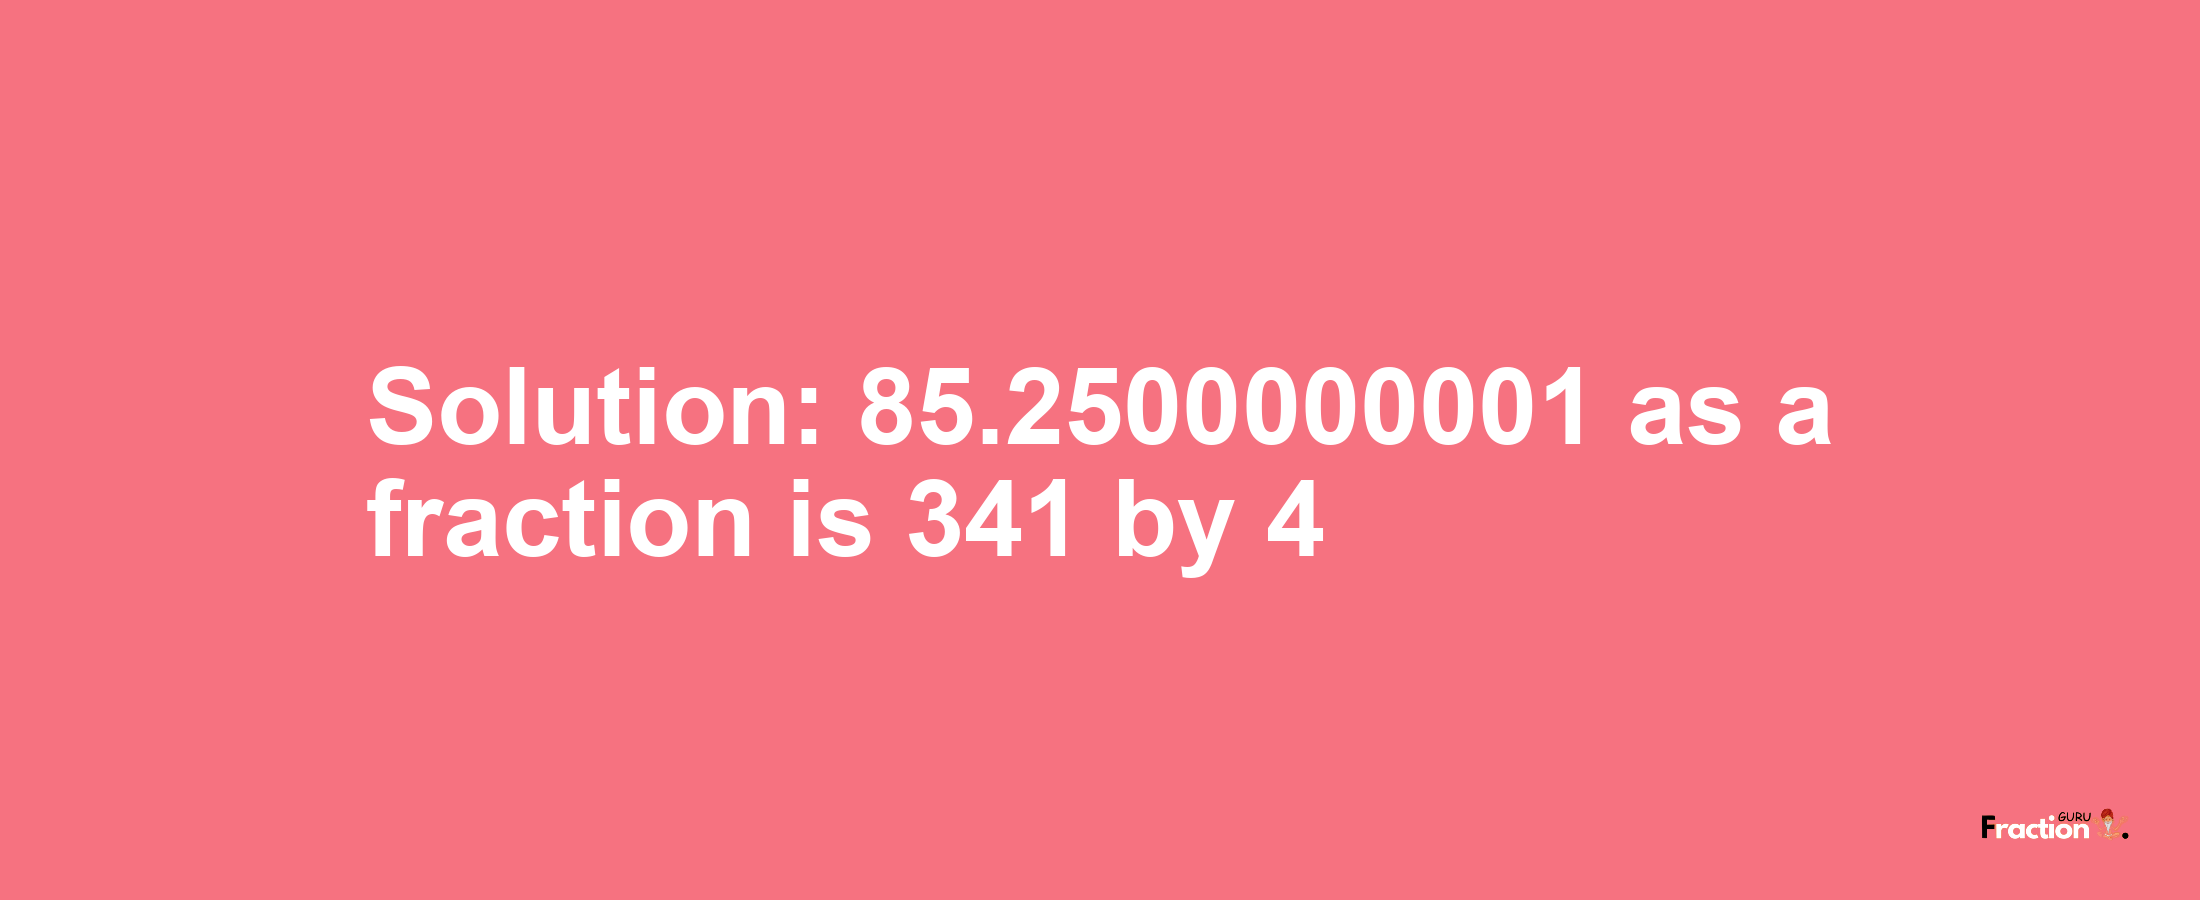 Solution:85.2500000001 as a fraction is 341/4